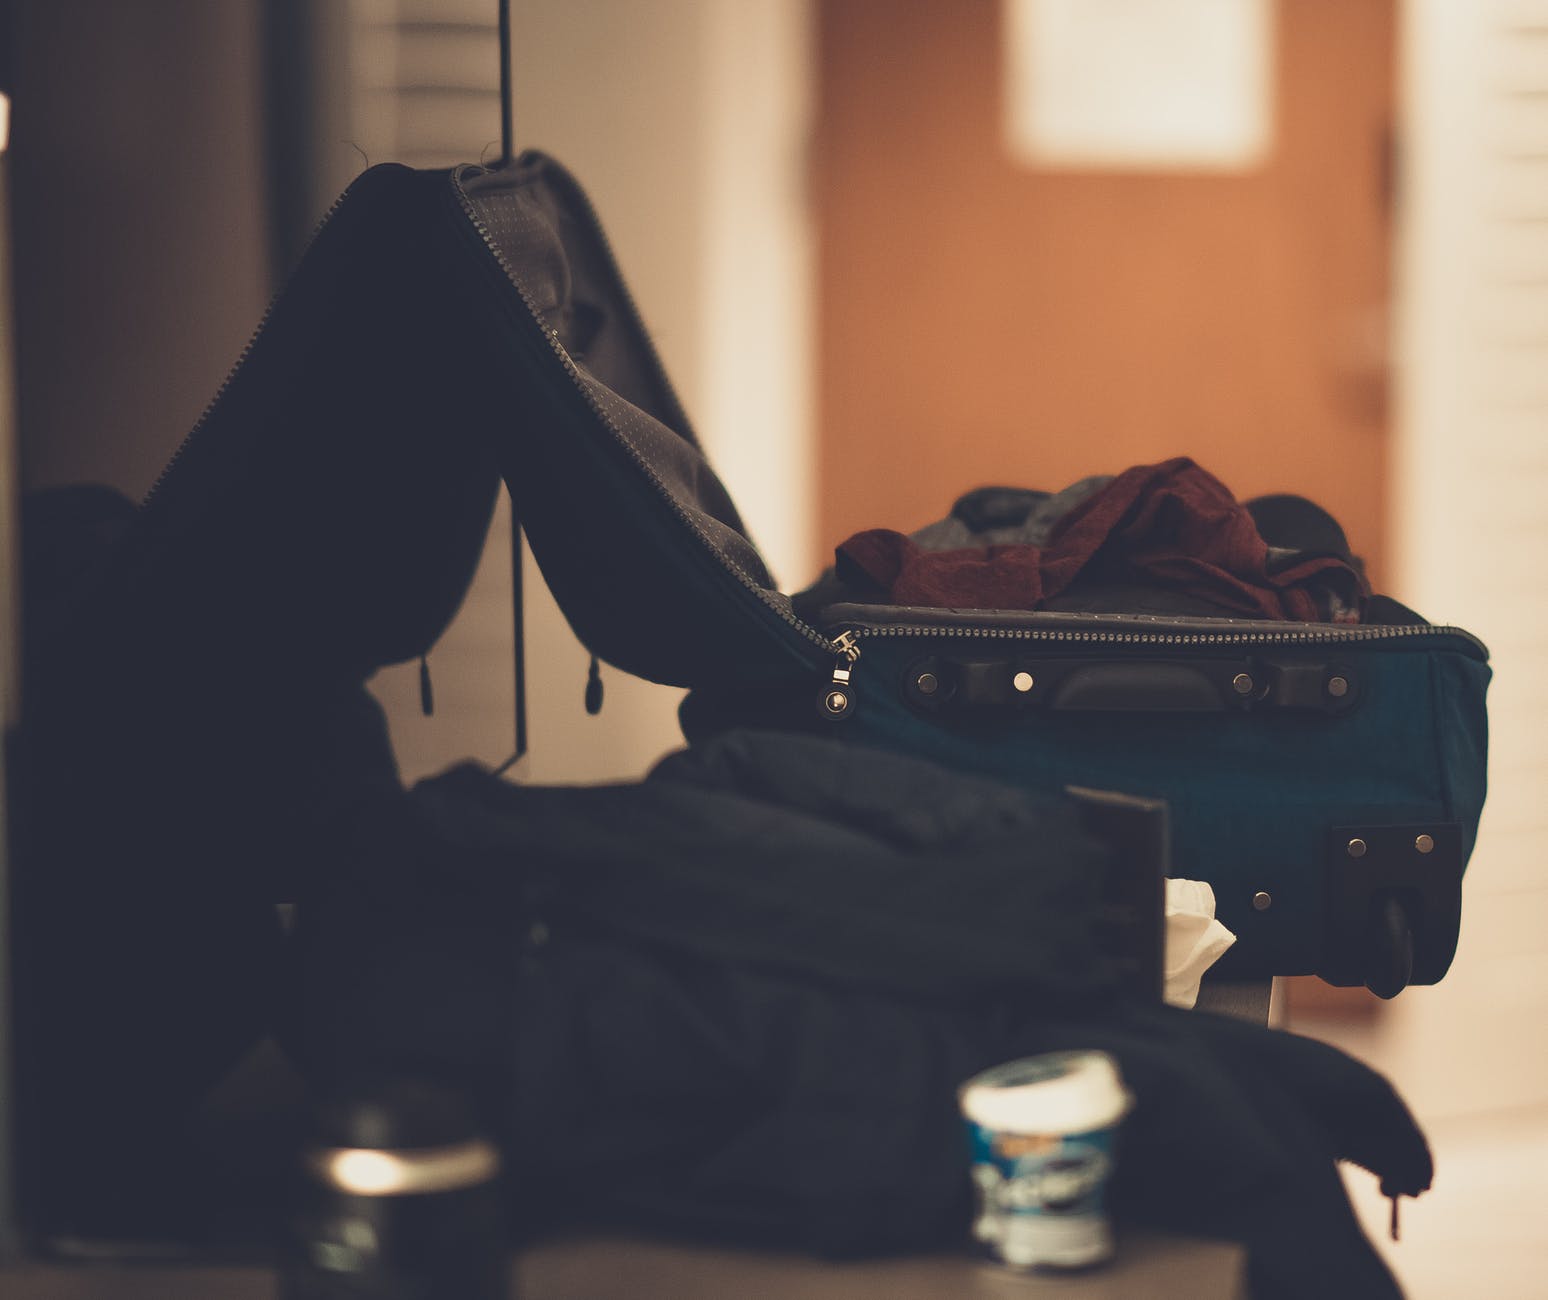 Lana packed her things and left. | Source: Pexels